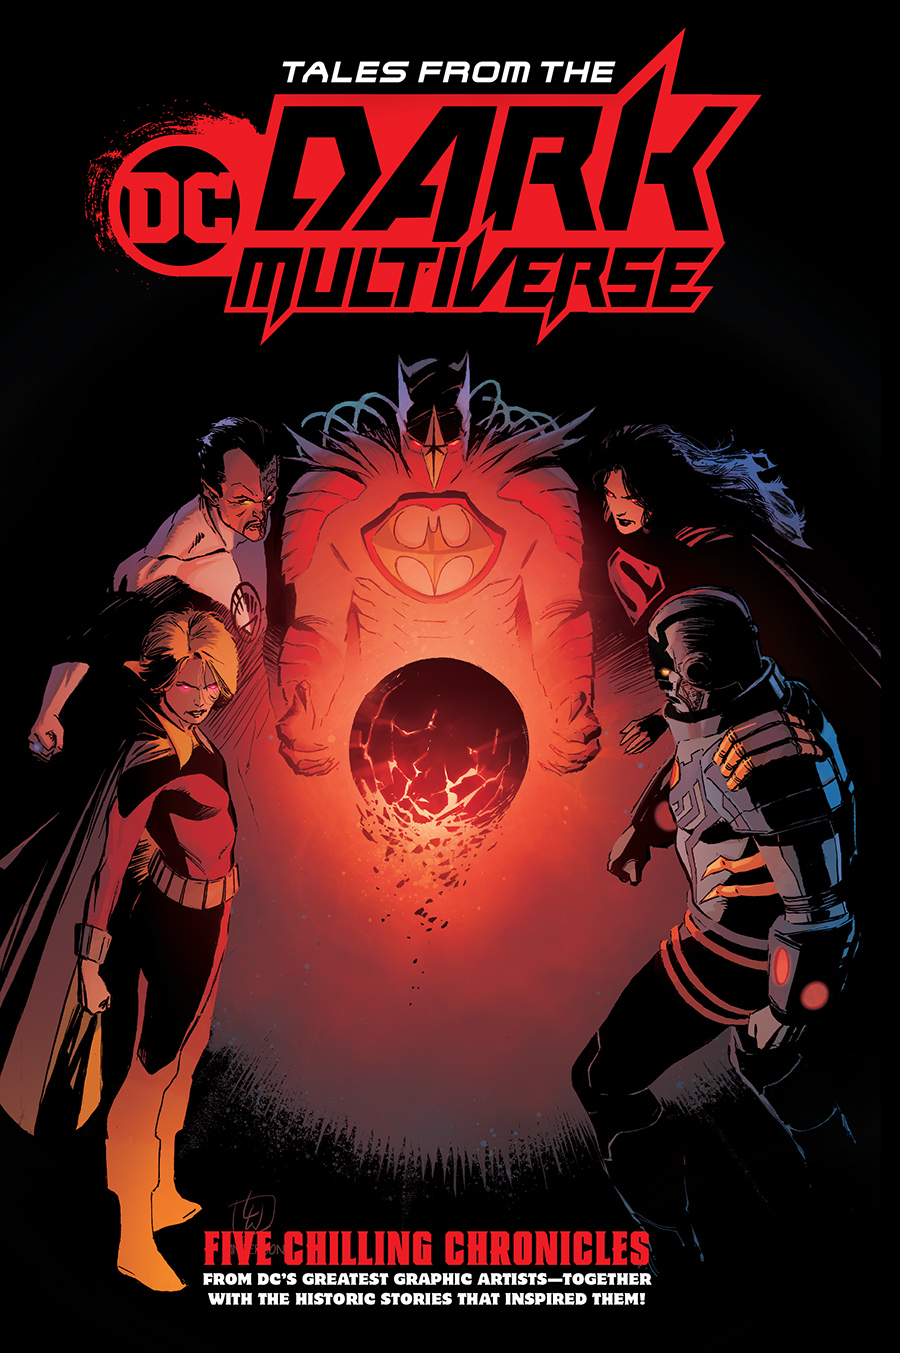 TALES FROM THE DC DARK MULTIVERSE TP